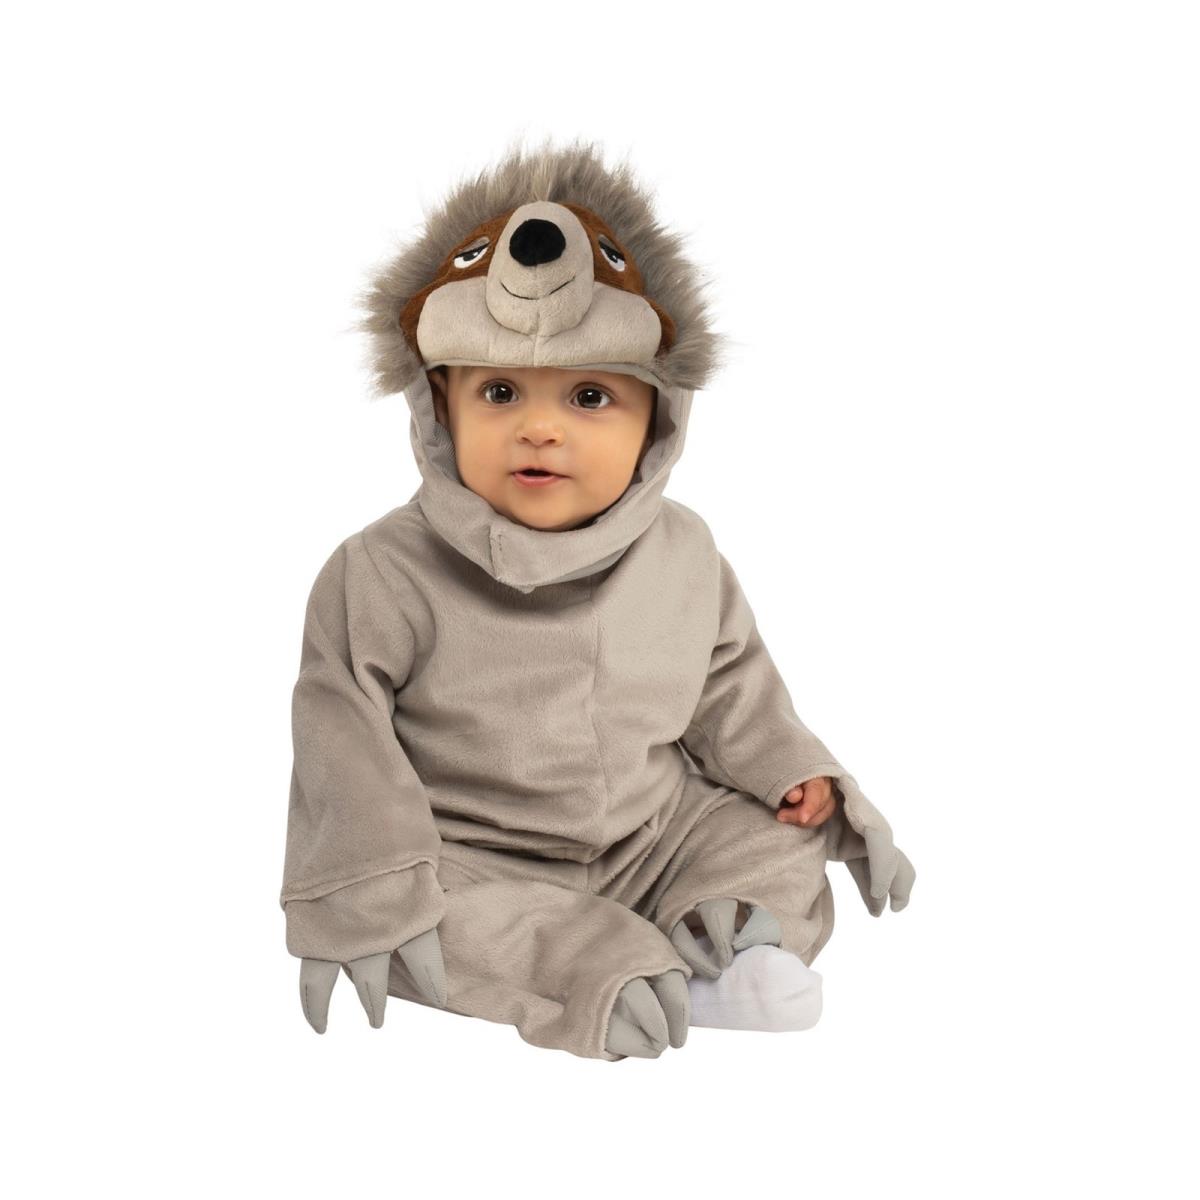 Picture of Rubies 405624 Sloth Infant & Toddler Costume - Toddler